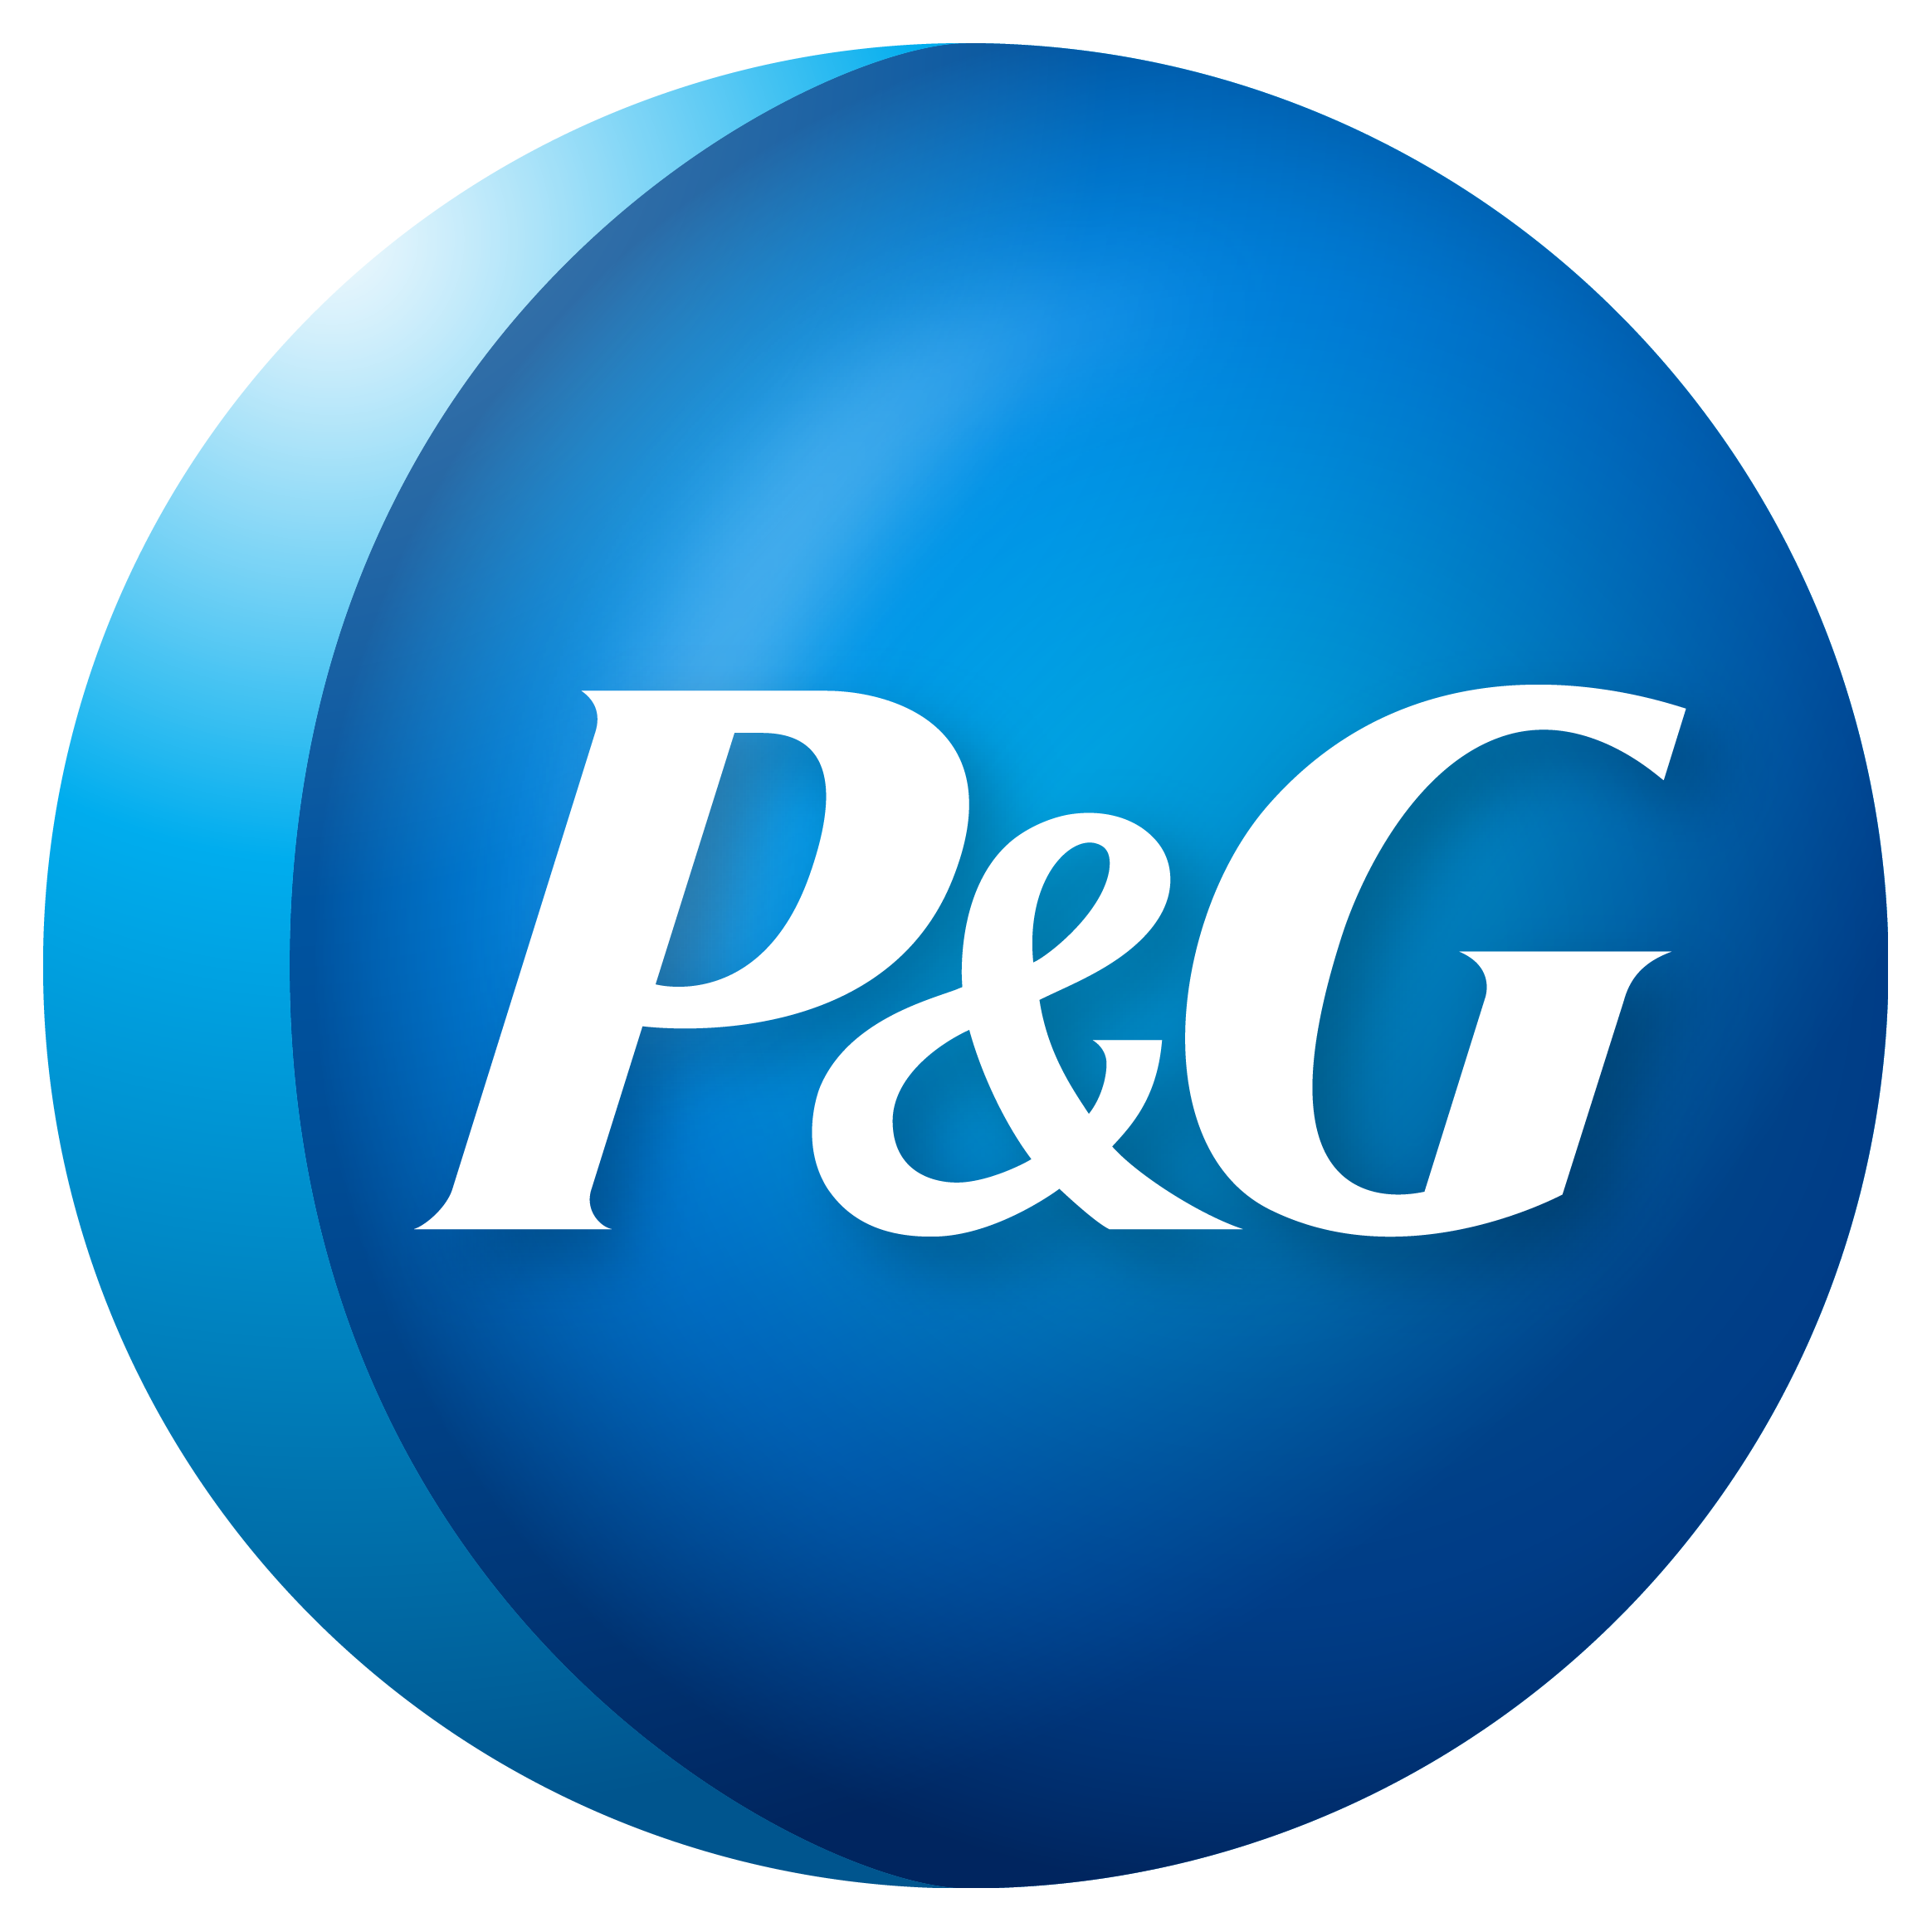 25-procter-and-gamble-ascqpharma